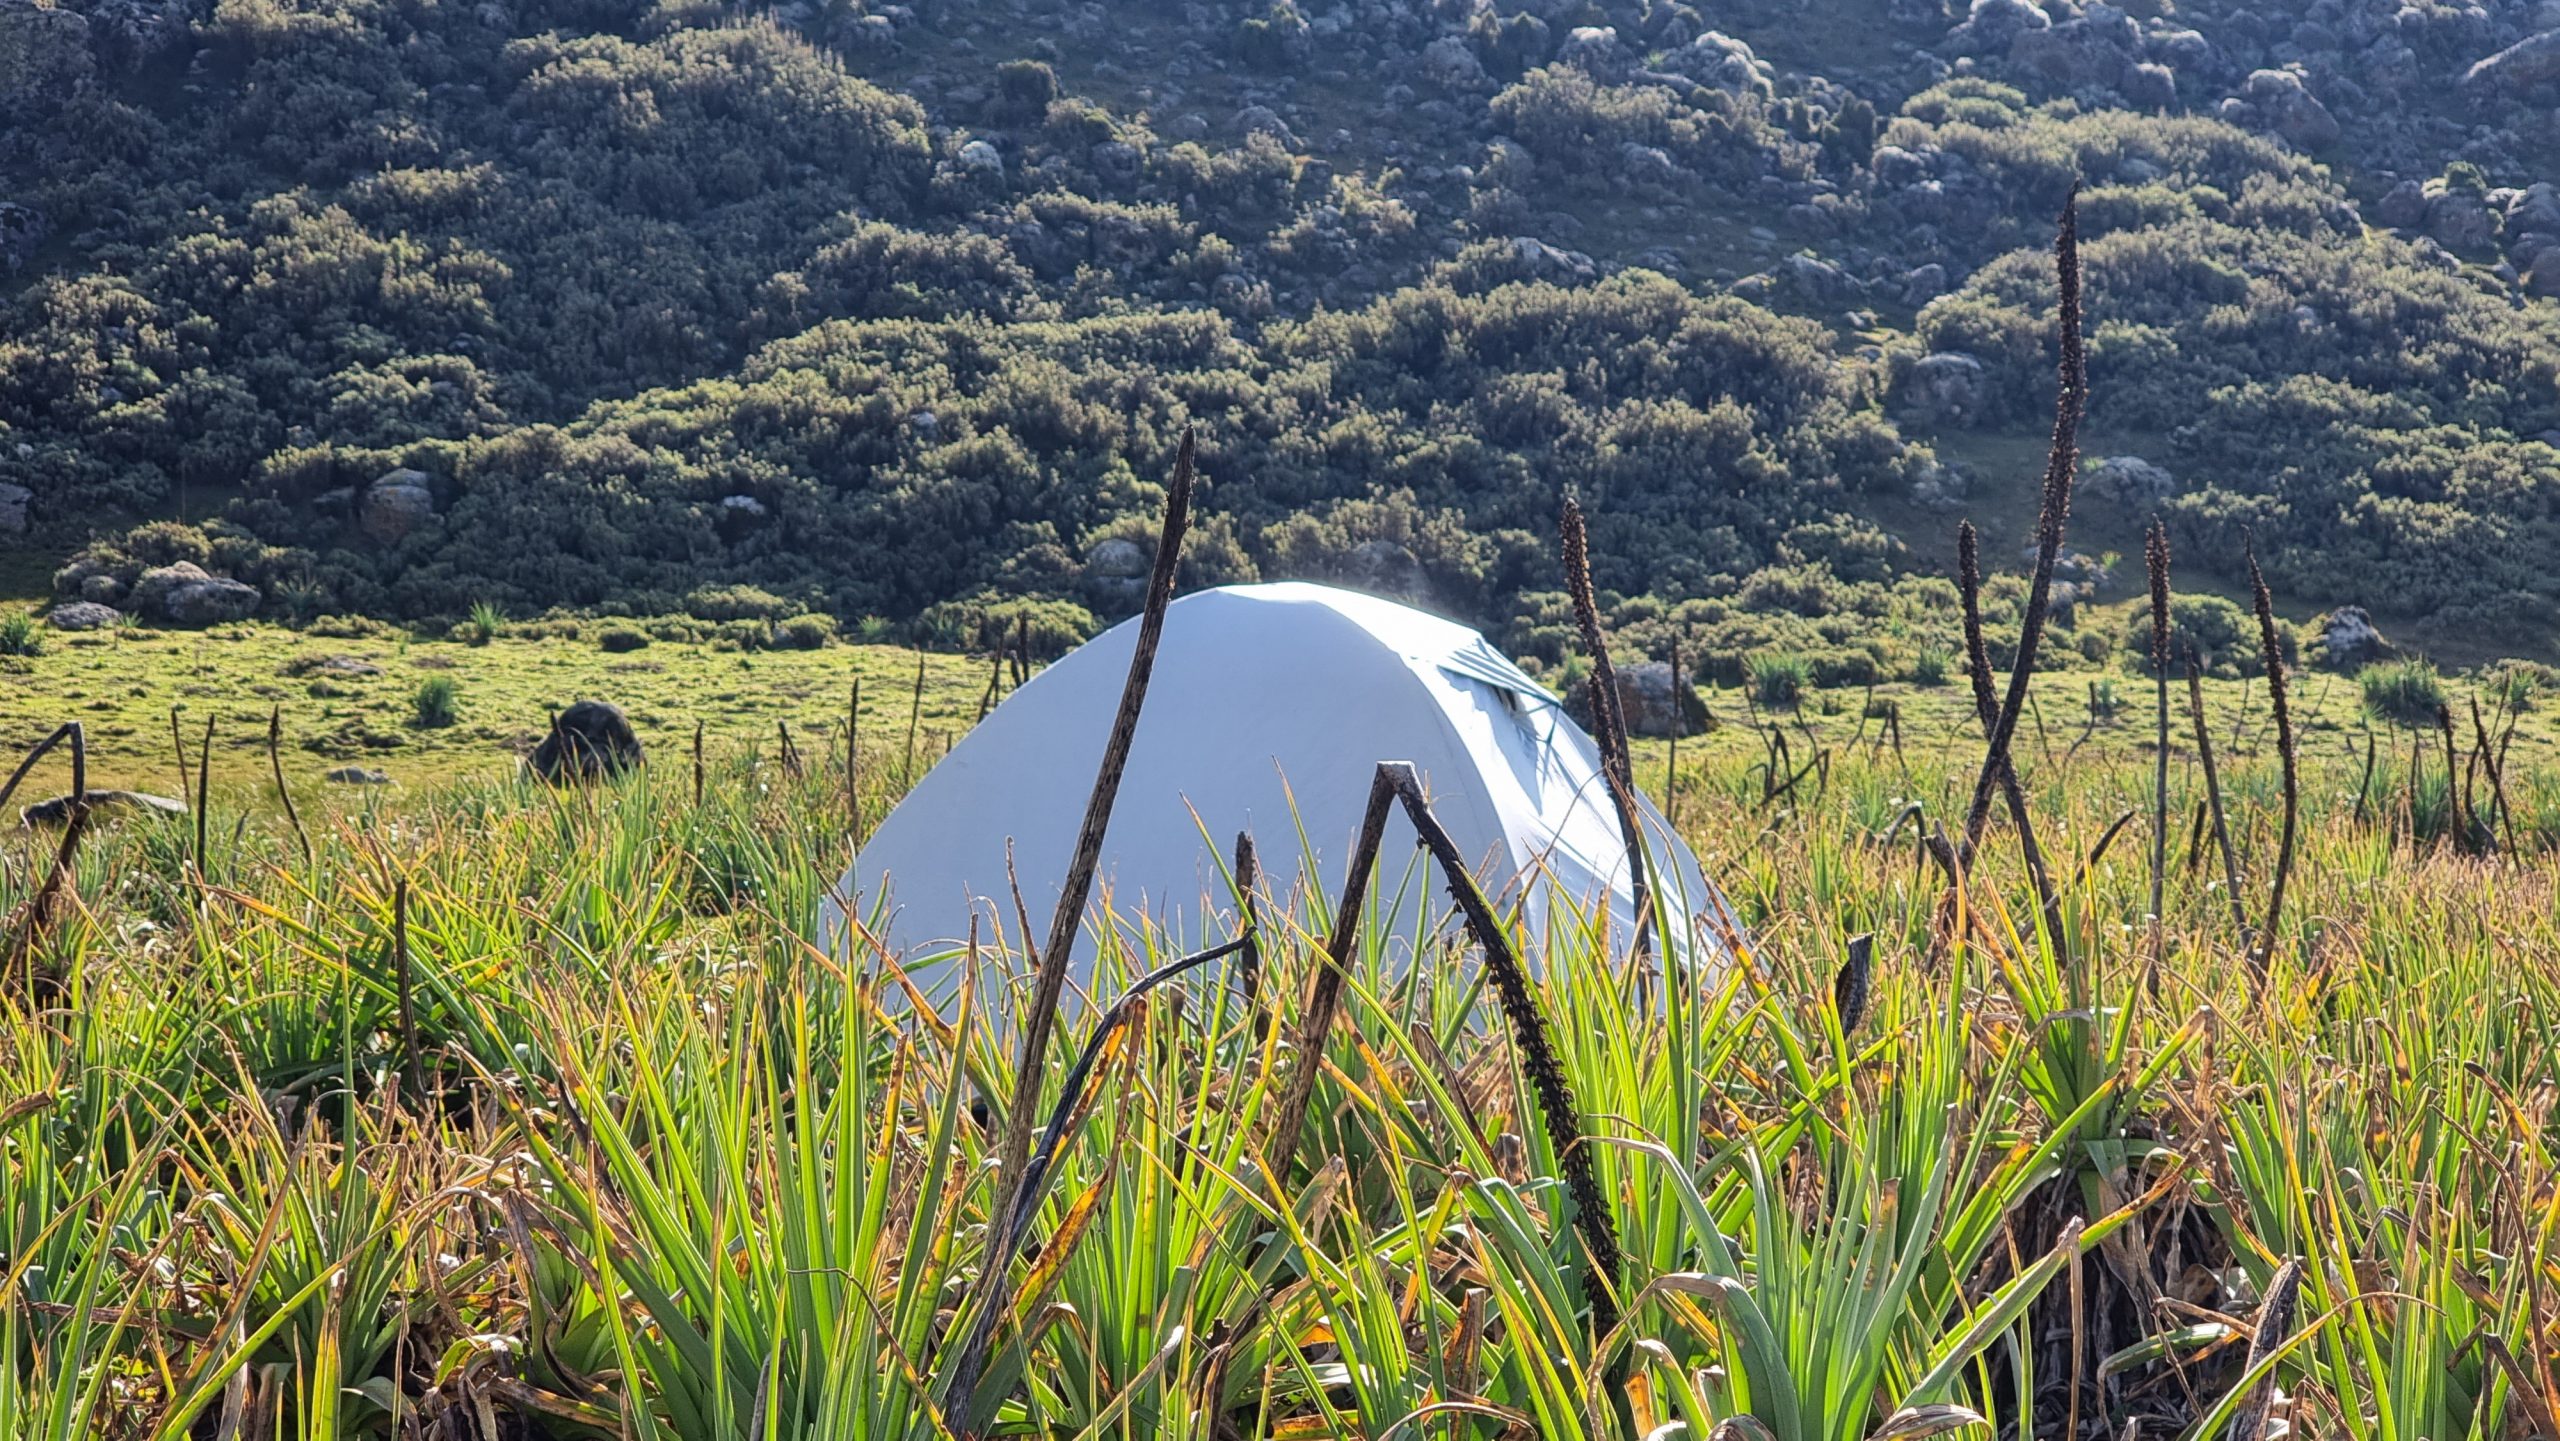 Tourism Investment Opportunity: Permanent Tented Camp Development